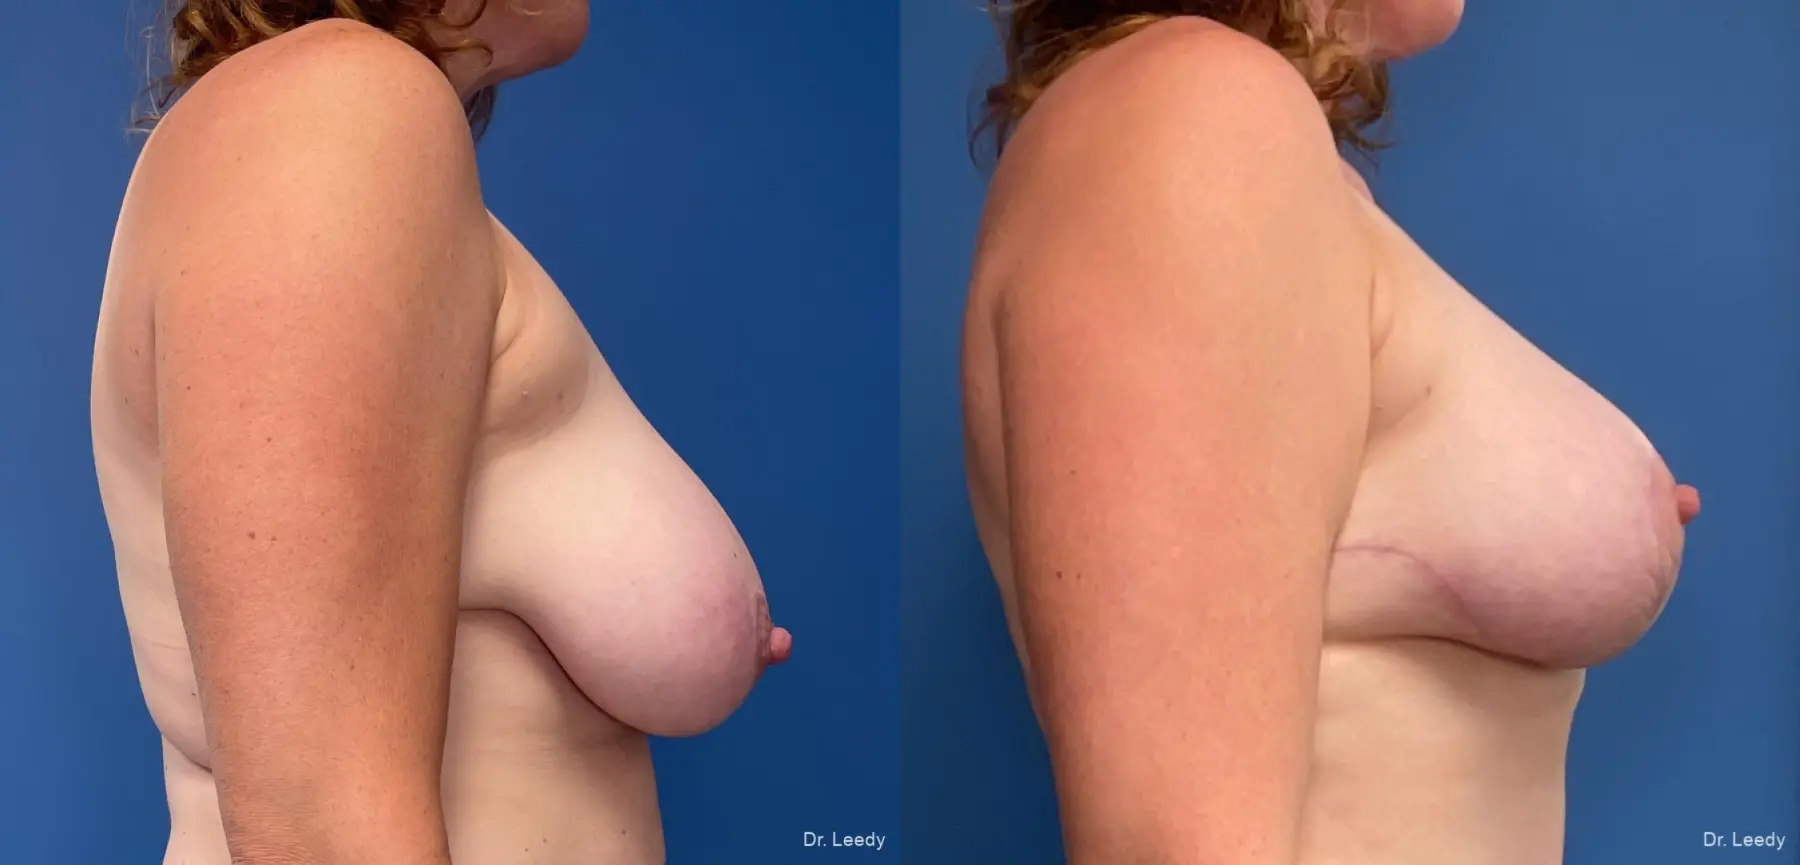 Mastopexy-Augmentation: Patient 2 - Before and After 3